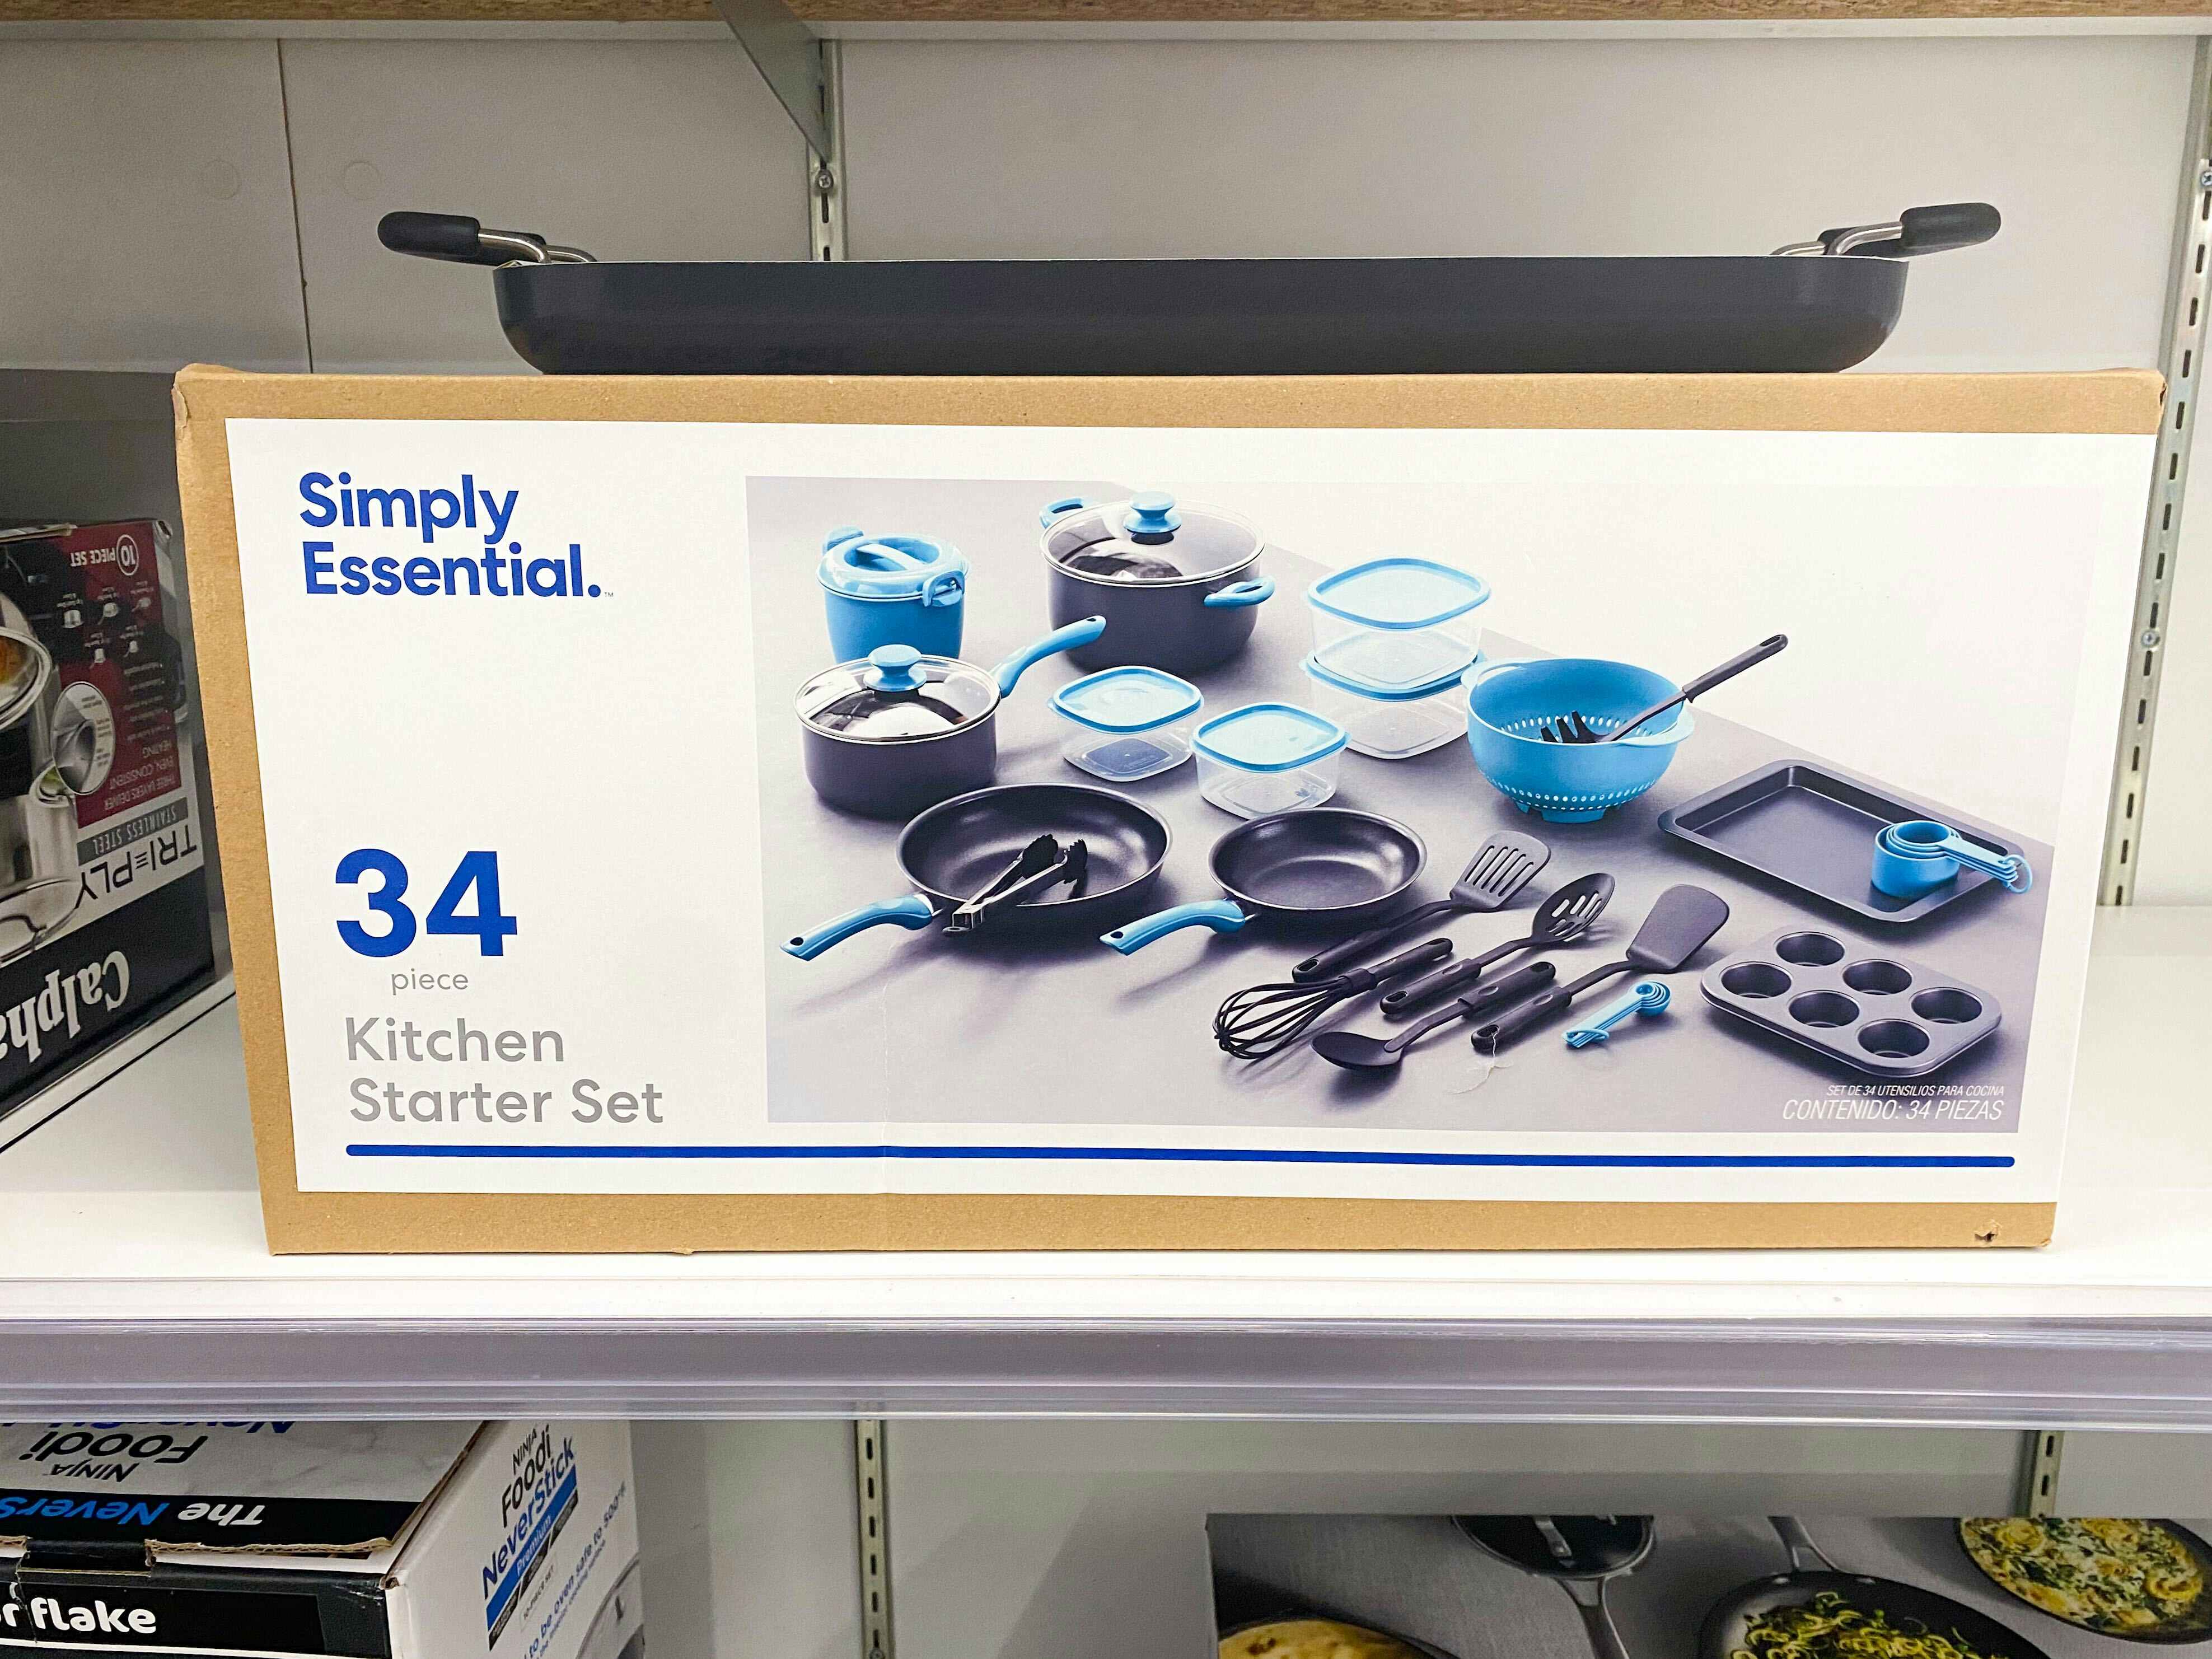 a 34-piece kitchen starter set in its box. contains frying pans, muffin tin, cookie sheet, utensils, etc